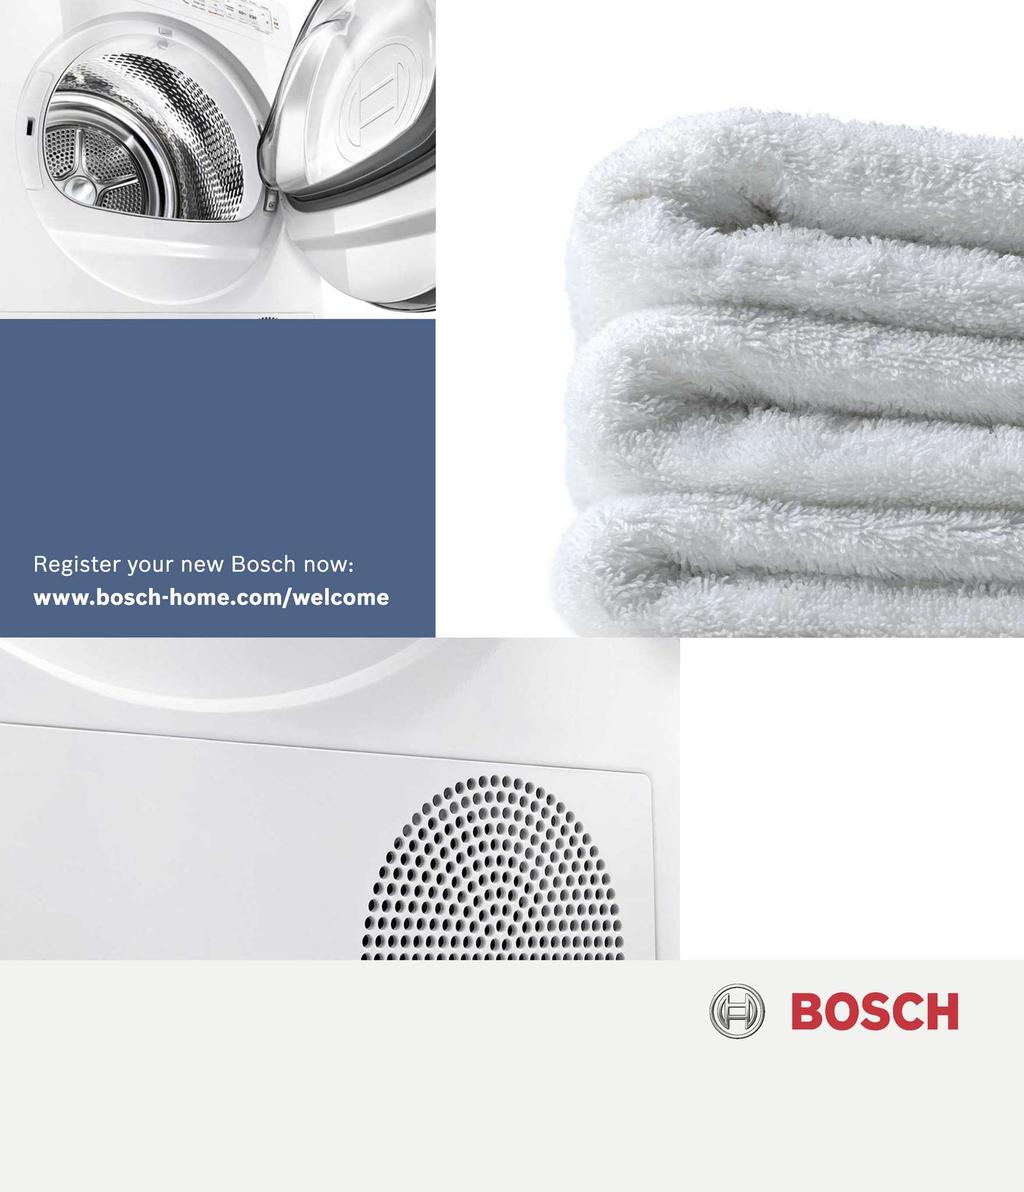 Do not set up in a room that is susceptible to frost. Freezing water may cause damage. If in doubt, have the appliance connected by a specialist.